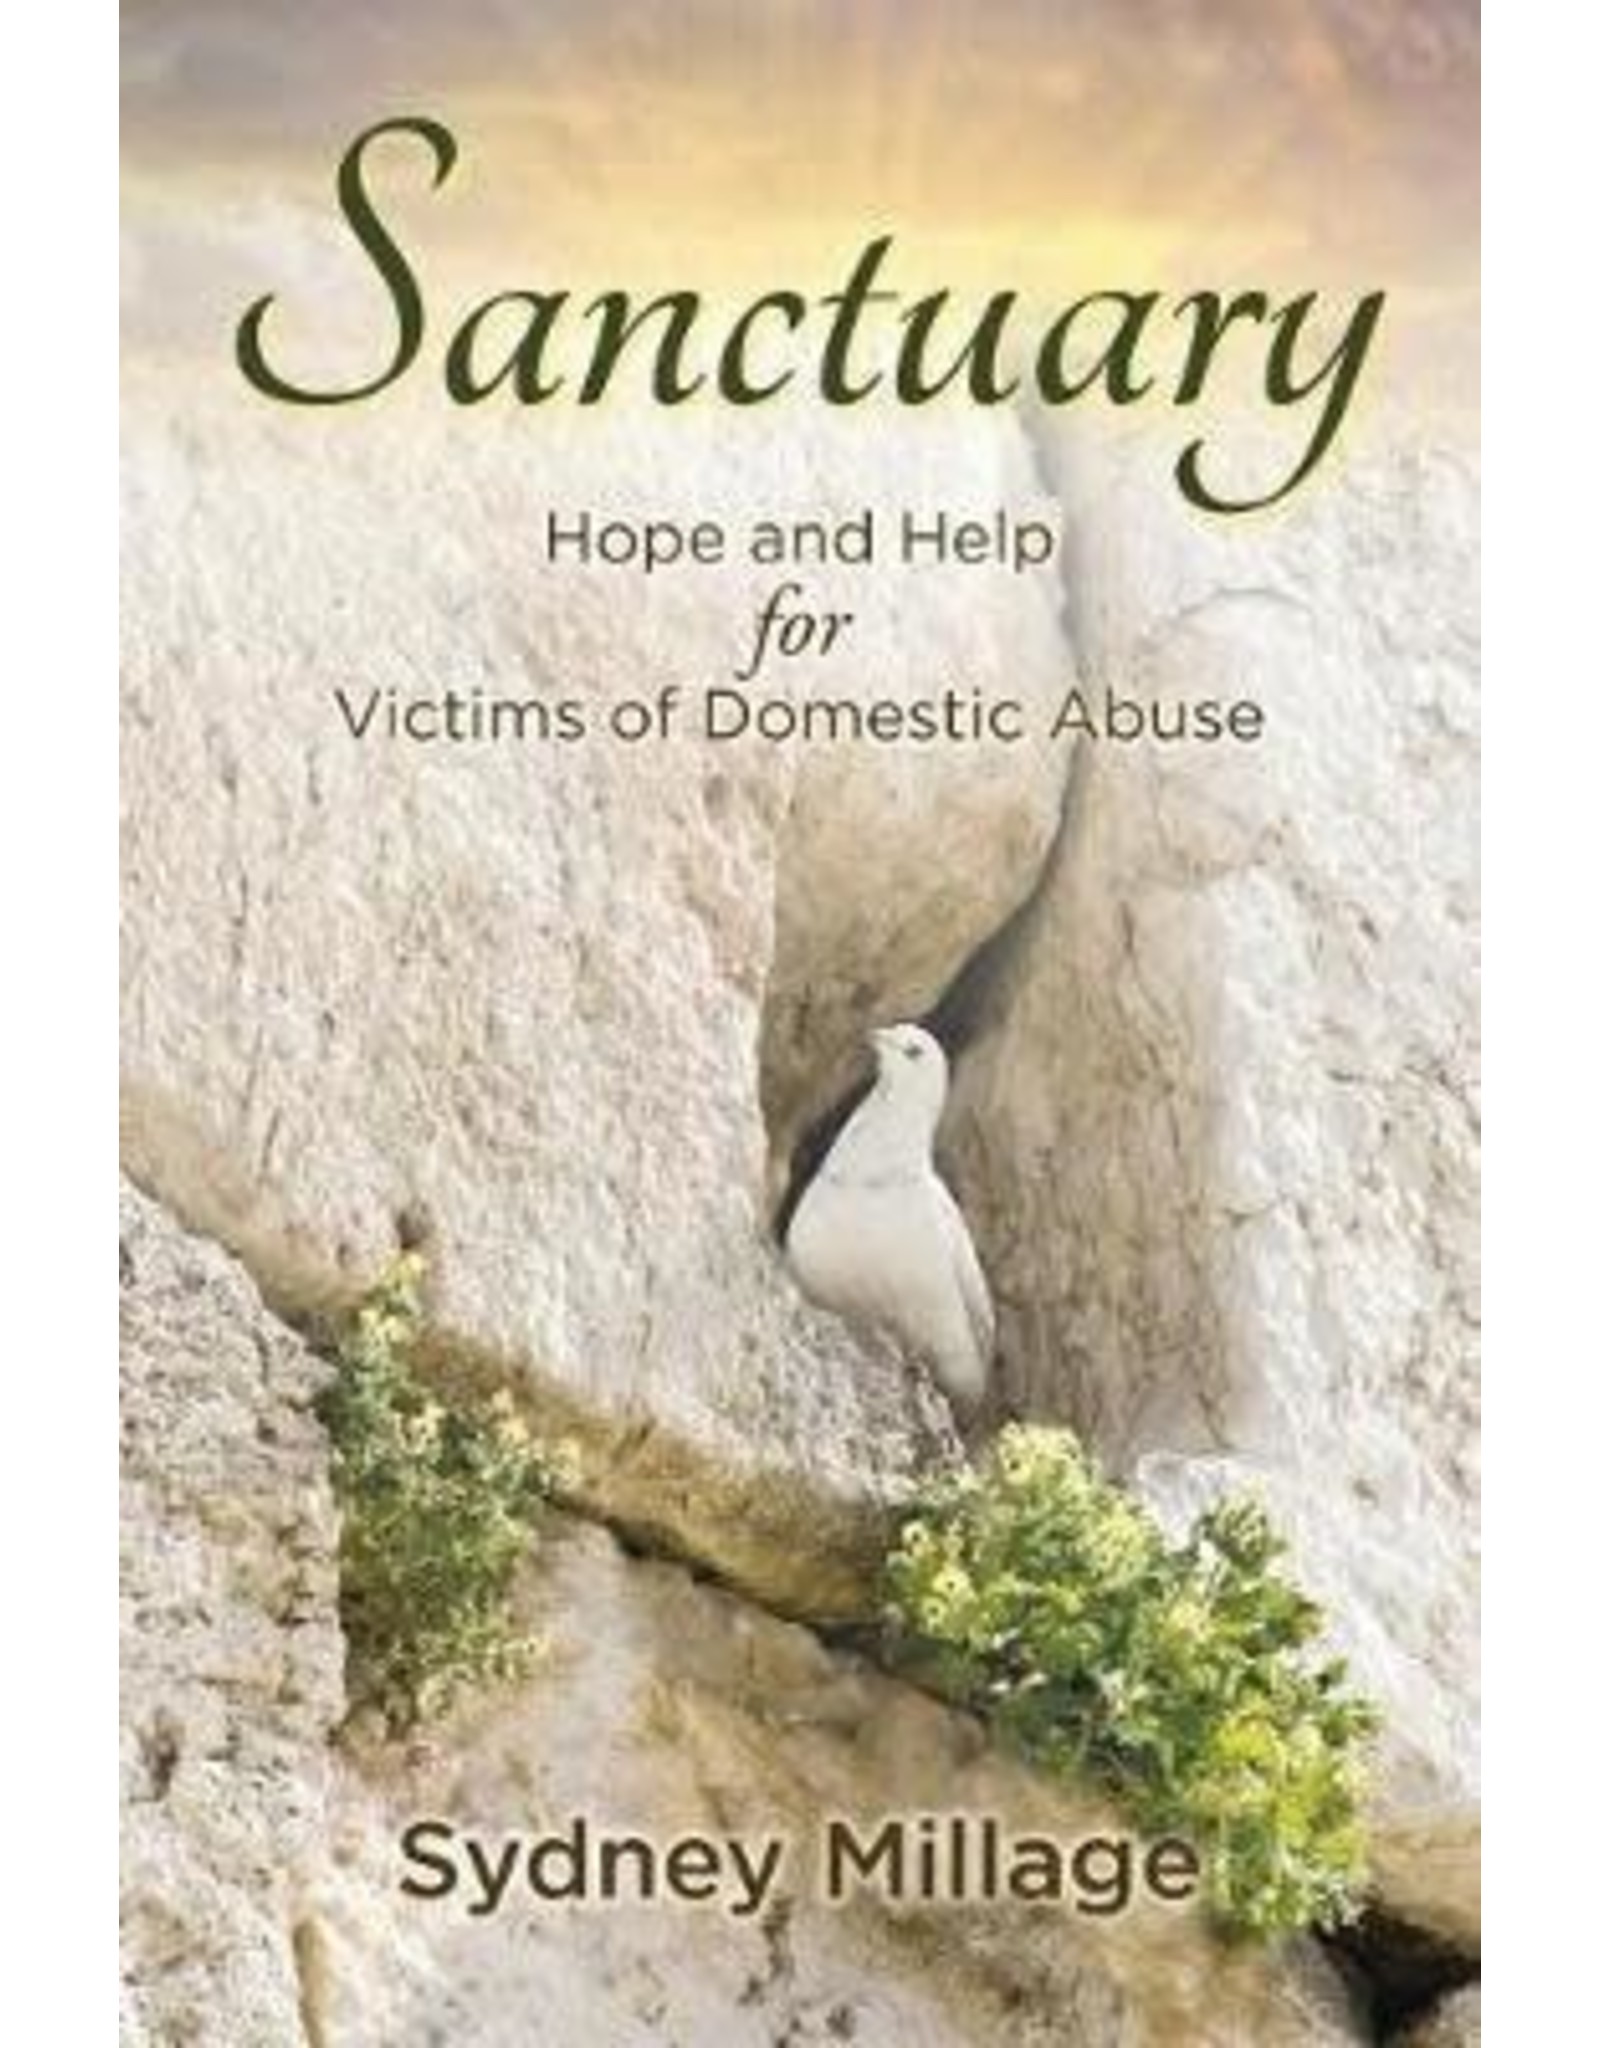 Sydney Millage Sanctuary Hope and Help for Victims of Domestic Abuse